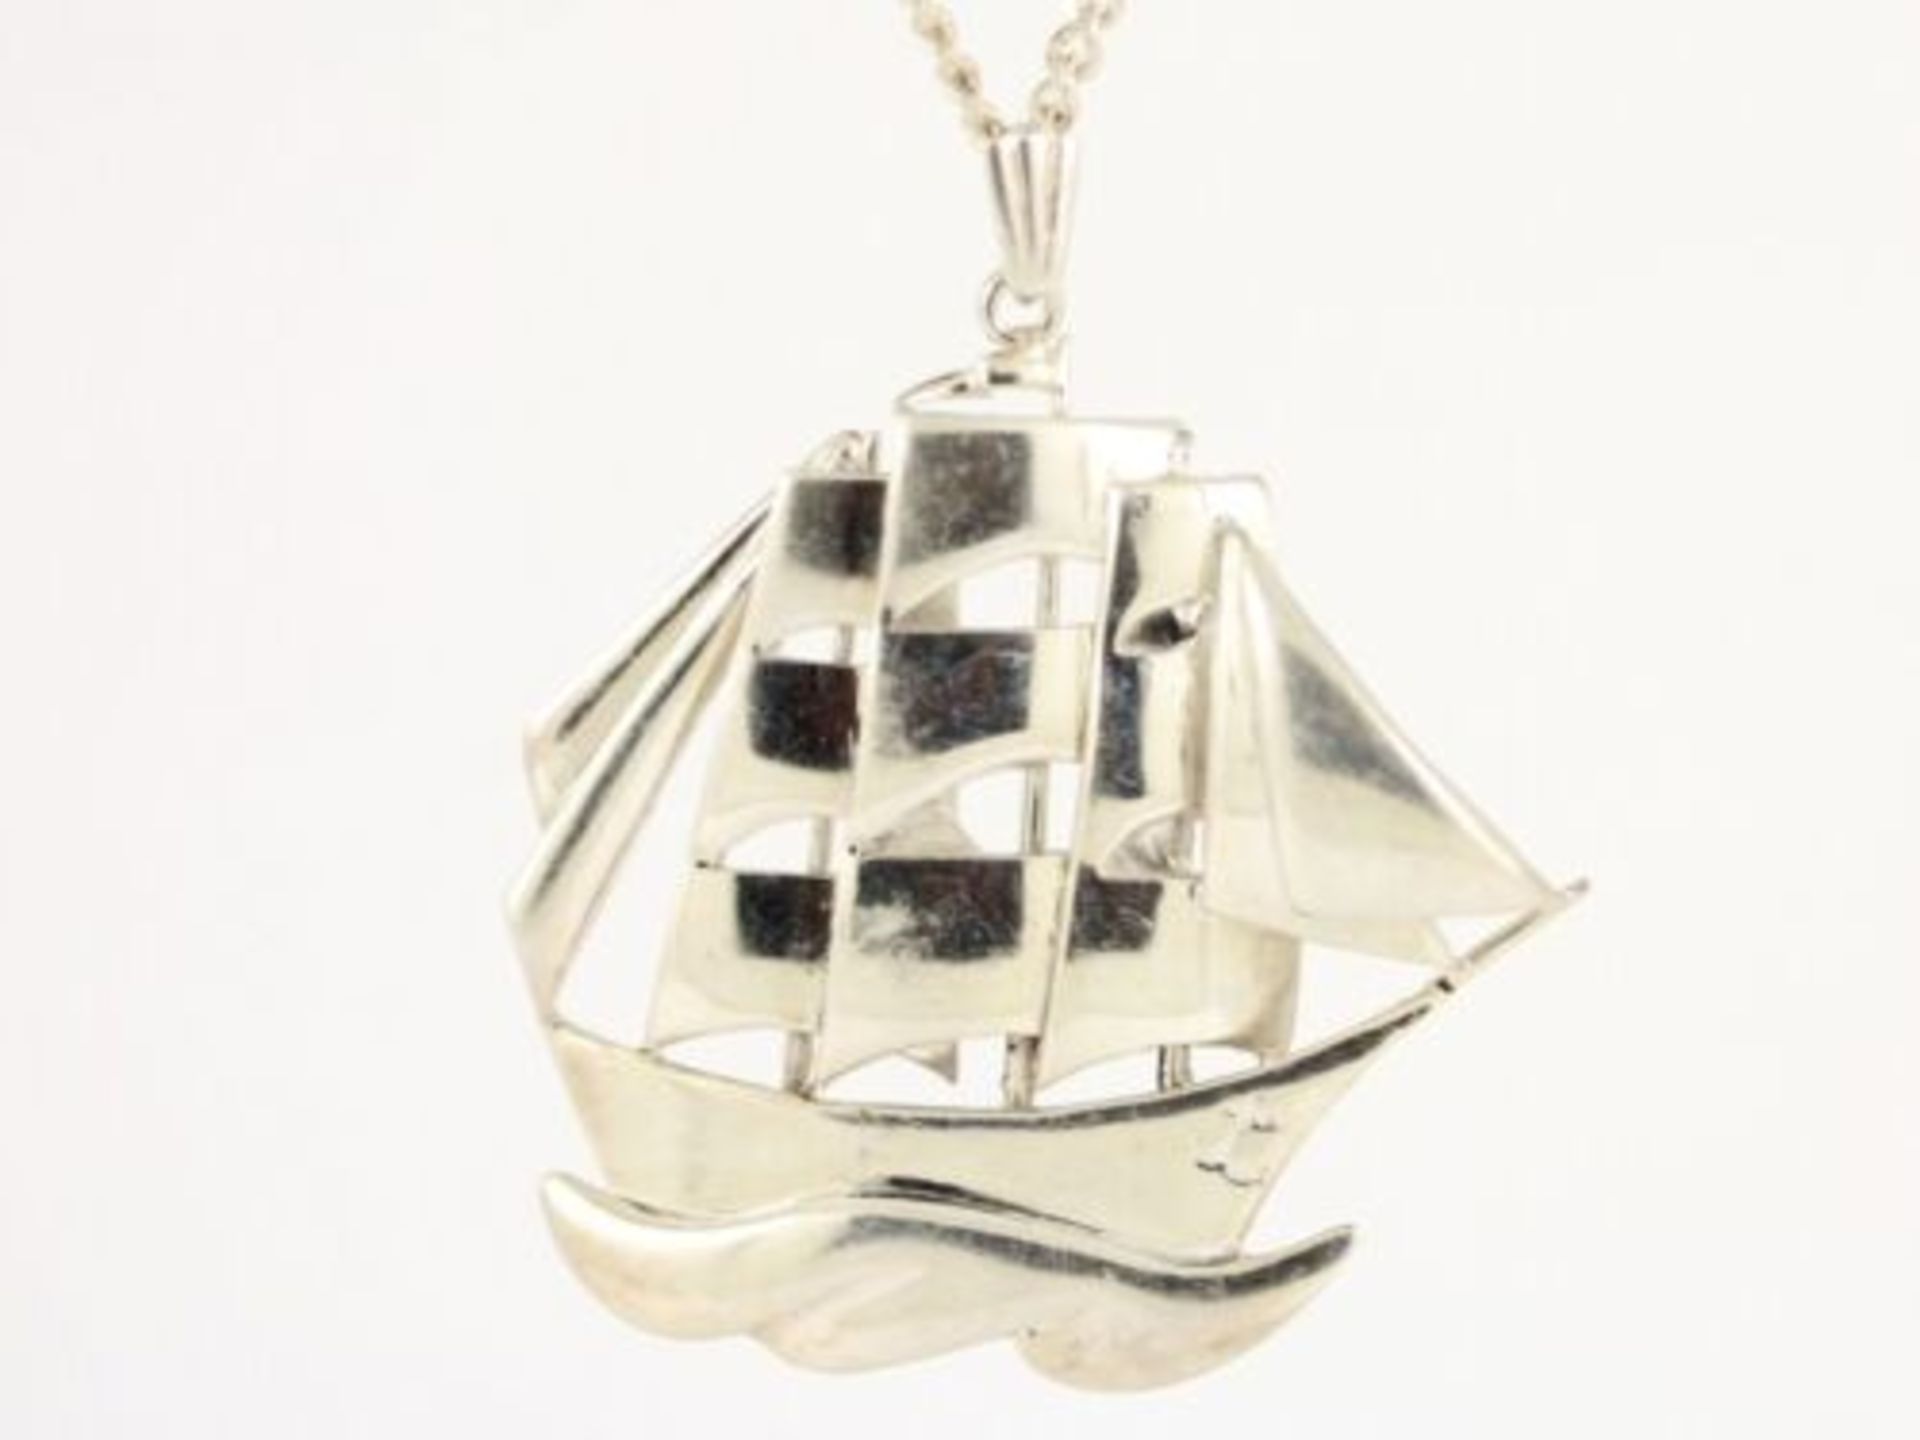 LARGE SHIP PENDANT STERLING SILVER CHAIN NECKLACE 18" SCOTTISH 22.1G 925 BT61